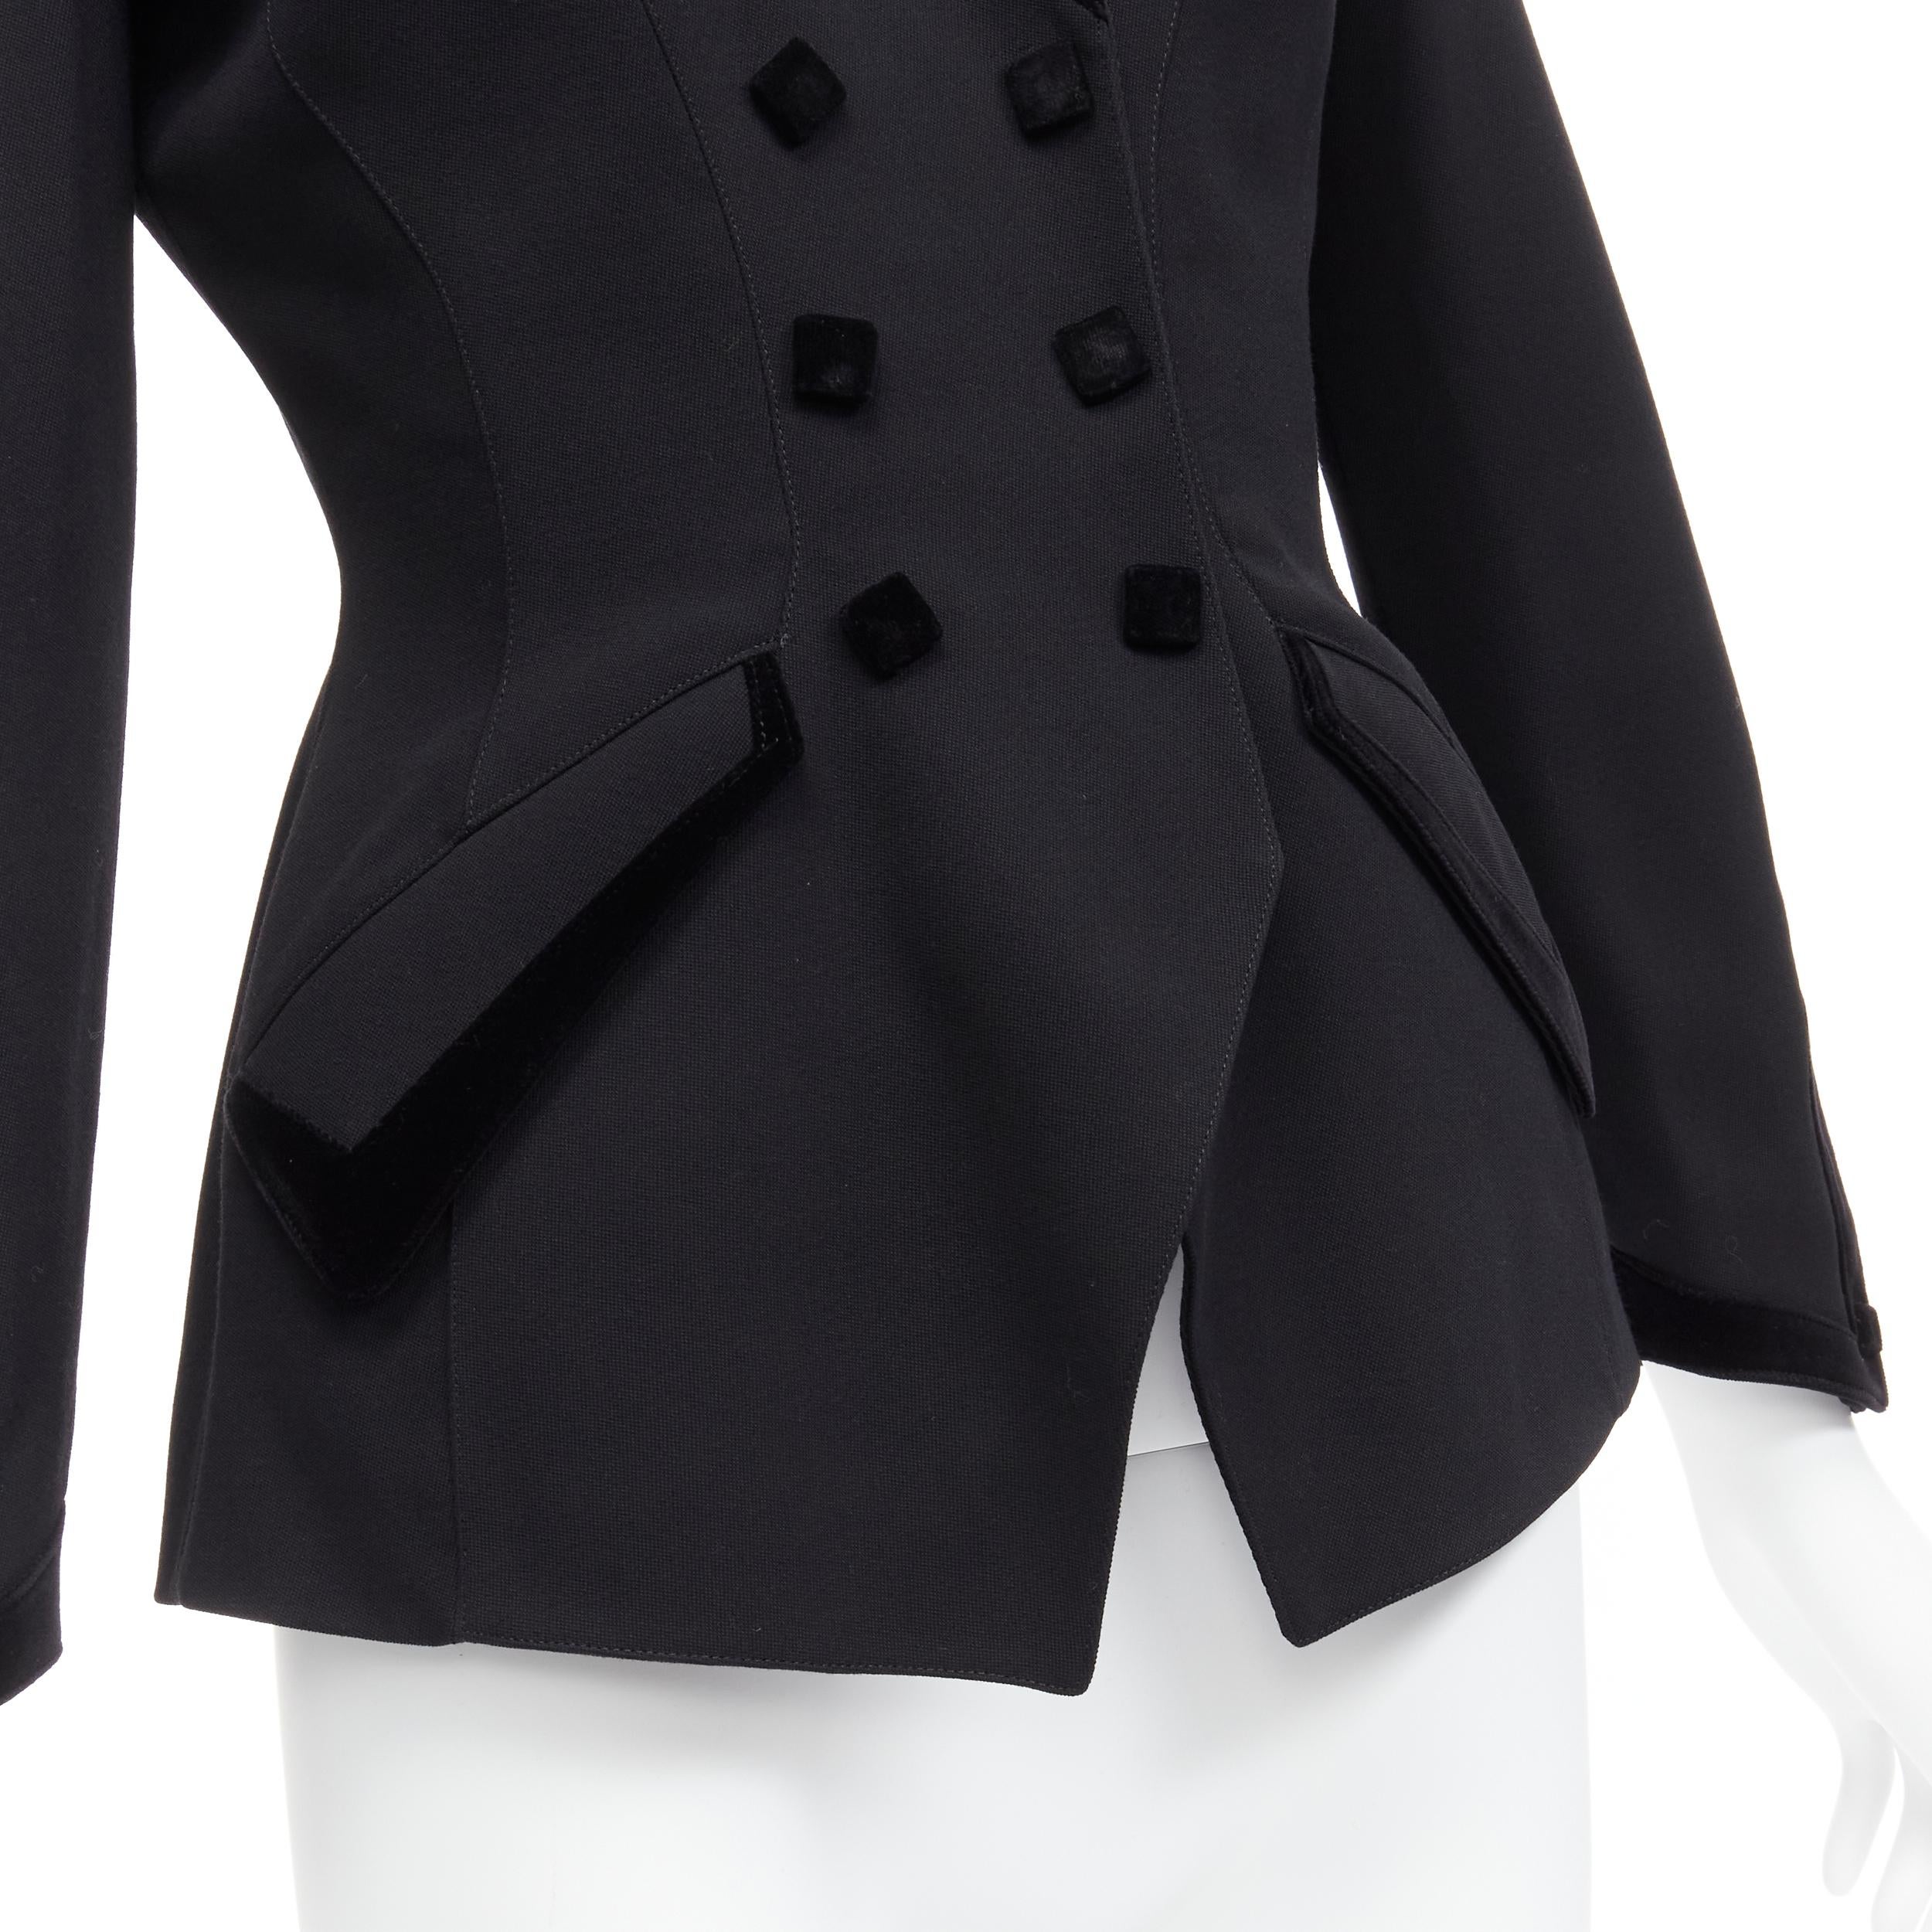 THIERRY MUGLER Vintage black wool curved lapel velvet shadow peplum blazer IT7AR S
Reference: TGAS/D00223
Brand: Thierry Mugler
Designer: Thierry Mugler
Material: Wool
Color: Black
Pattern: Solid
Closure: Snap Buttons
Lining: Black Fabric
Made in: